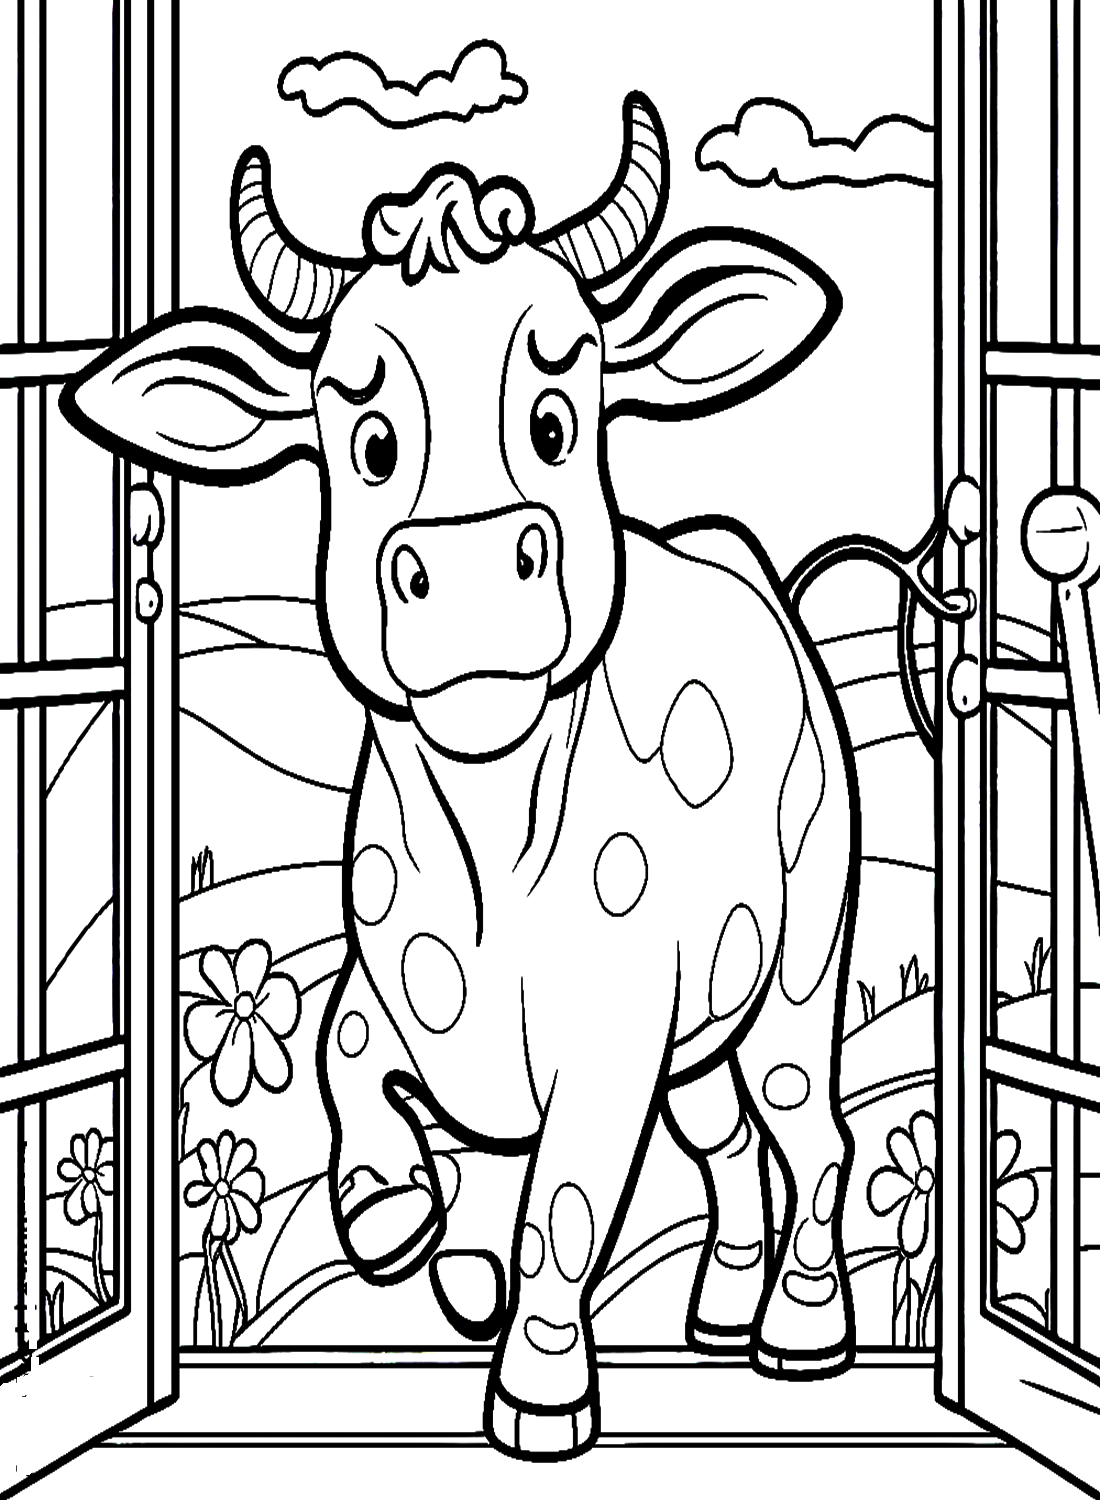 Calf Picture For Preschool from Calf